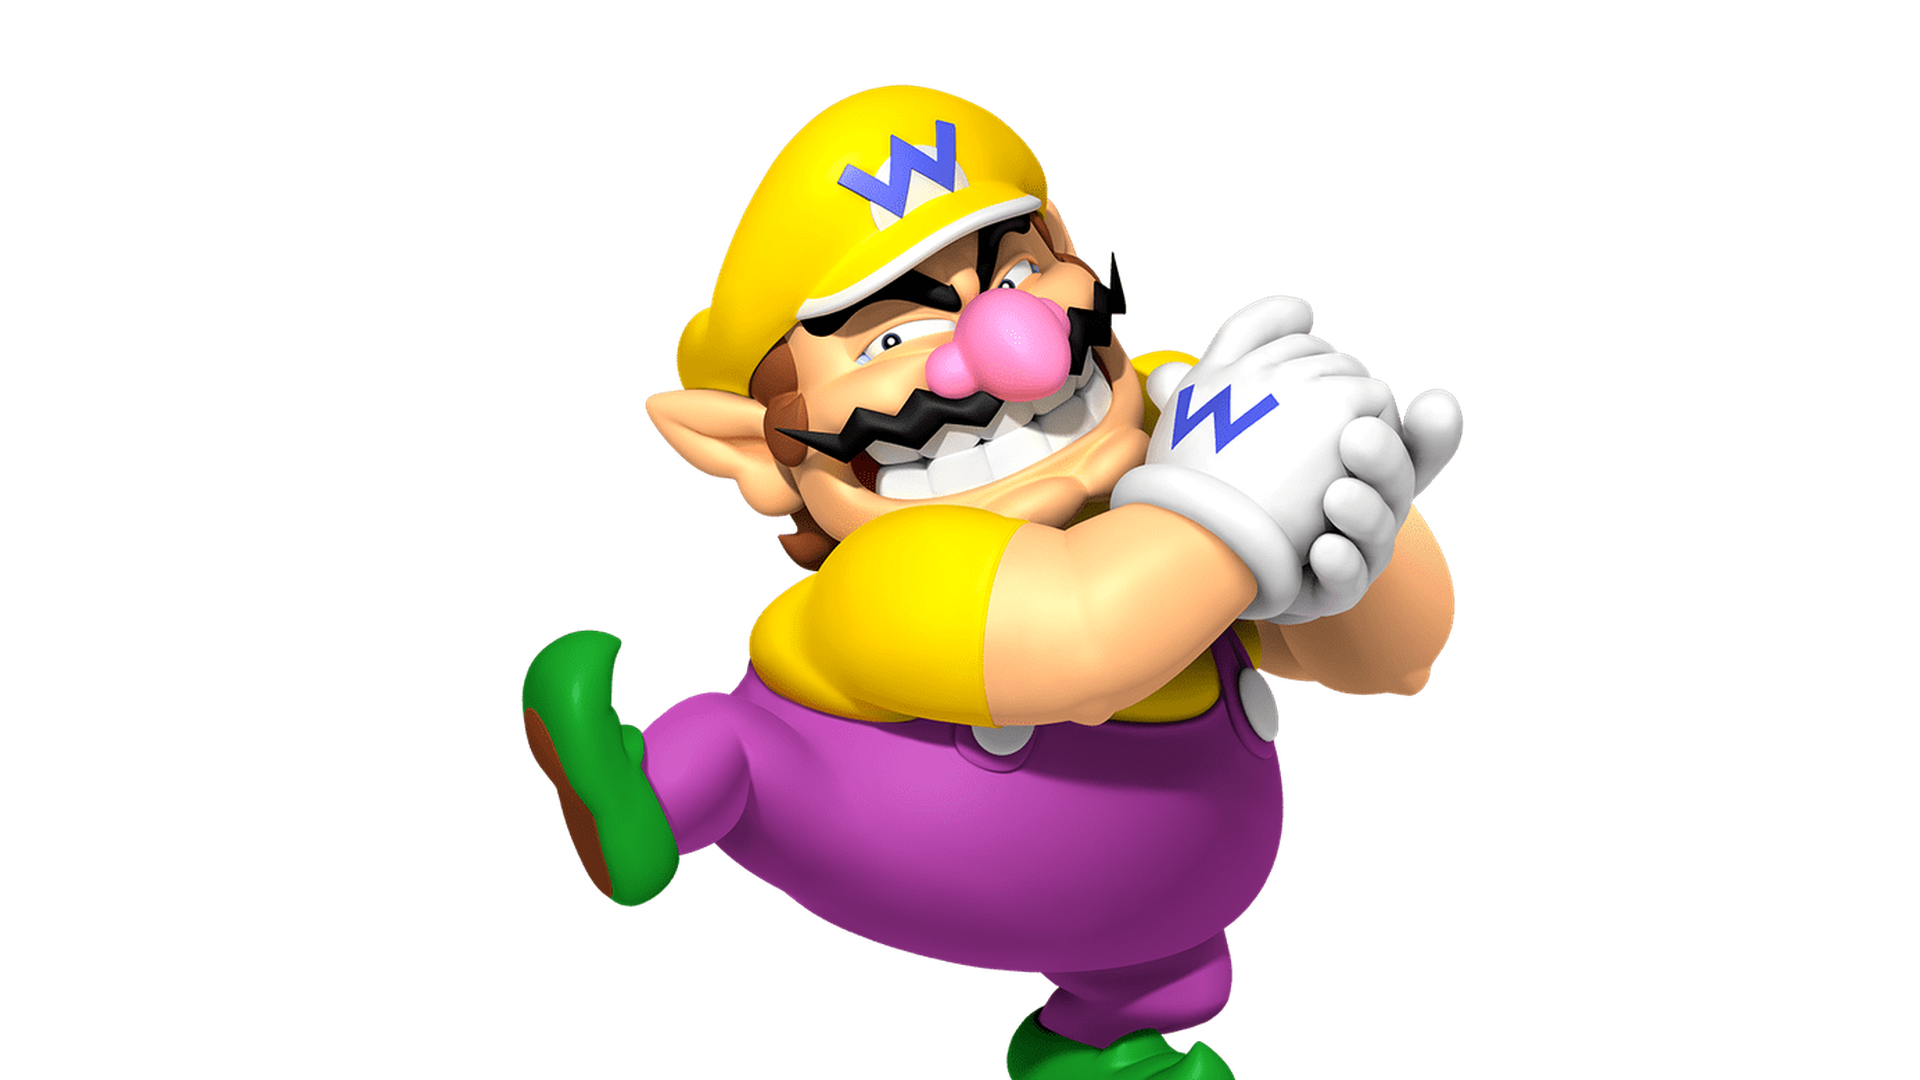 Image of the character Wario from Mario